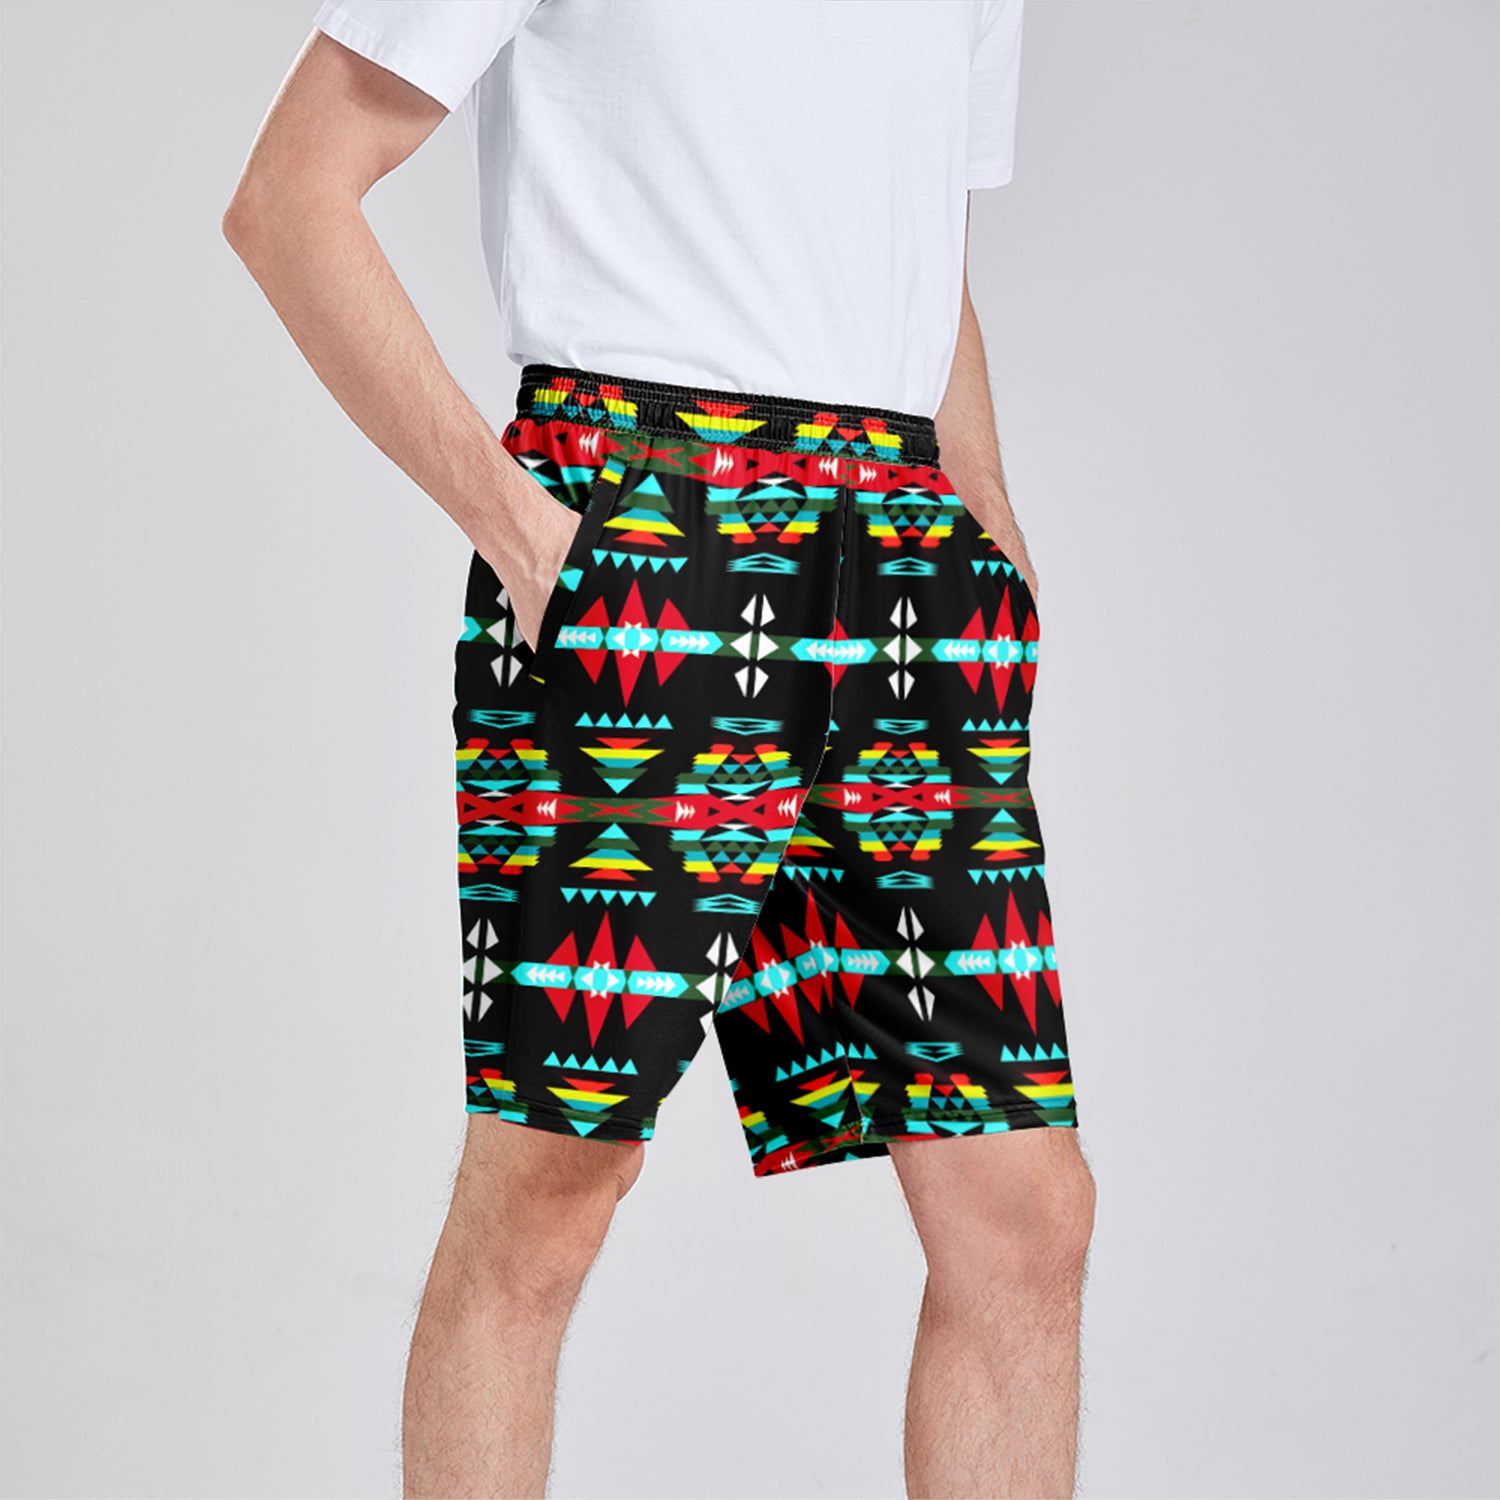 River Trail Sunset Athletic Shorts with Pockets